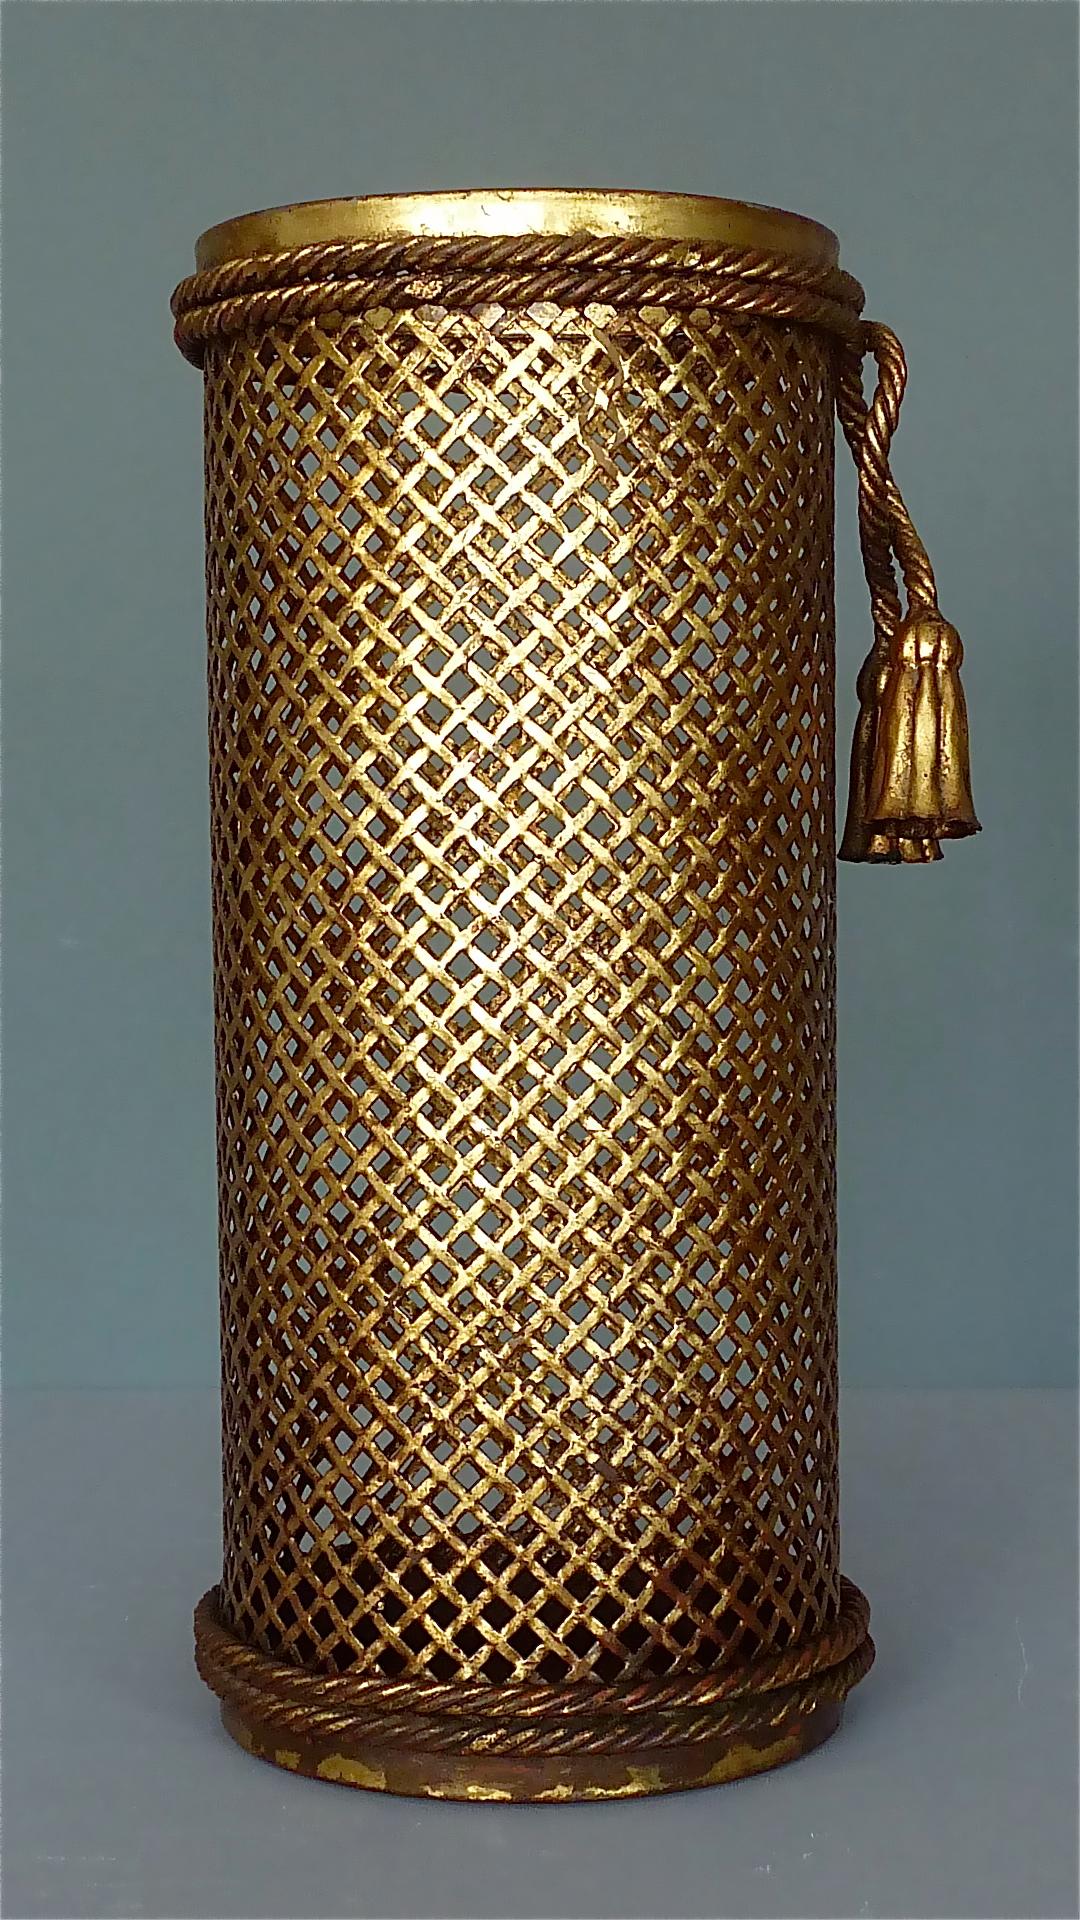 Early Italian Midcentury Umbrella Stand Basket Gilt Woven Metal Hans Kögl, 1950s For Sale 7